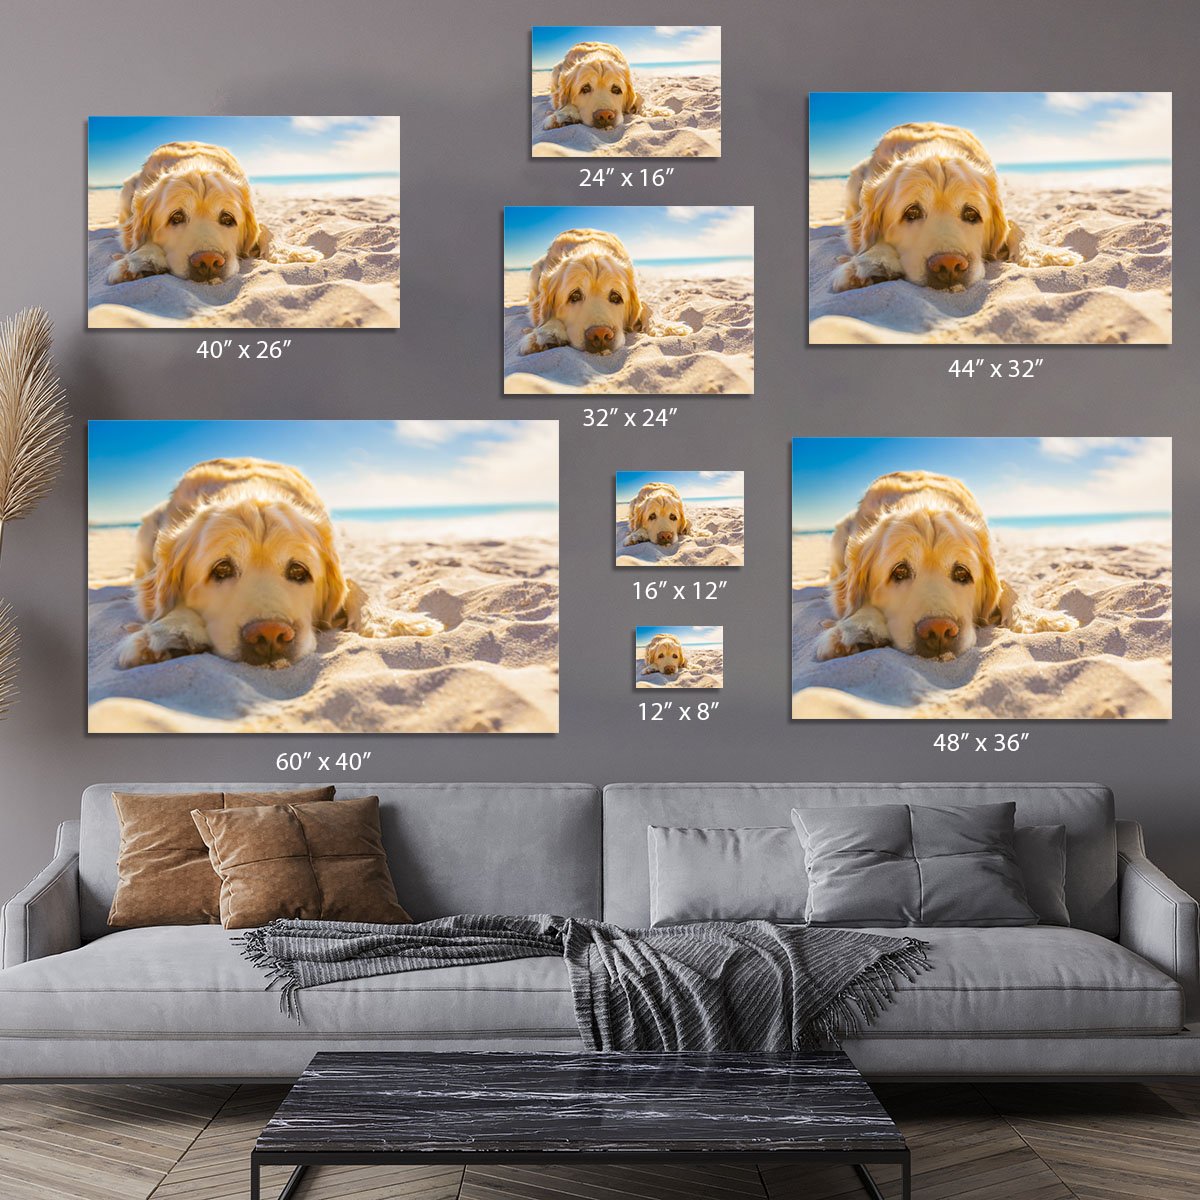 Golden retriever dog relaxing resting Canvas Print or Poster